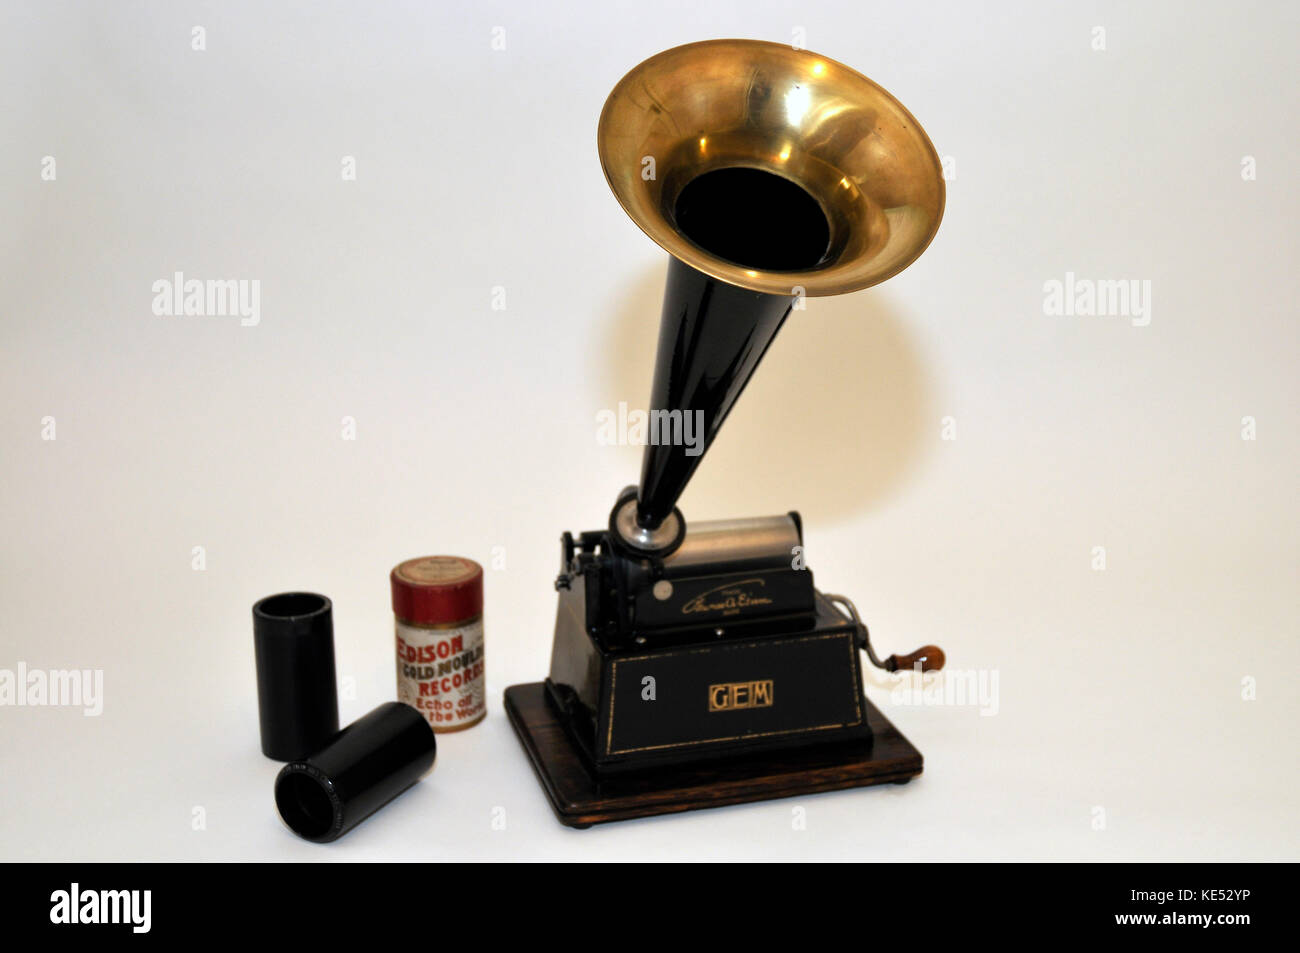 Edison gem phonograph using Edison Gold Moulded Records (cylinders) made in 1905.  Plays two minute cylinders only. Originally sold for $7.50 and made in America. Production began 1899, ended 1913. Invented by Thomas Edison. Stock Photo